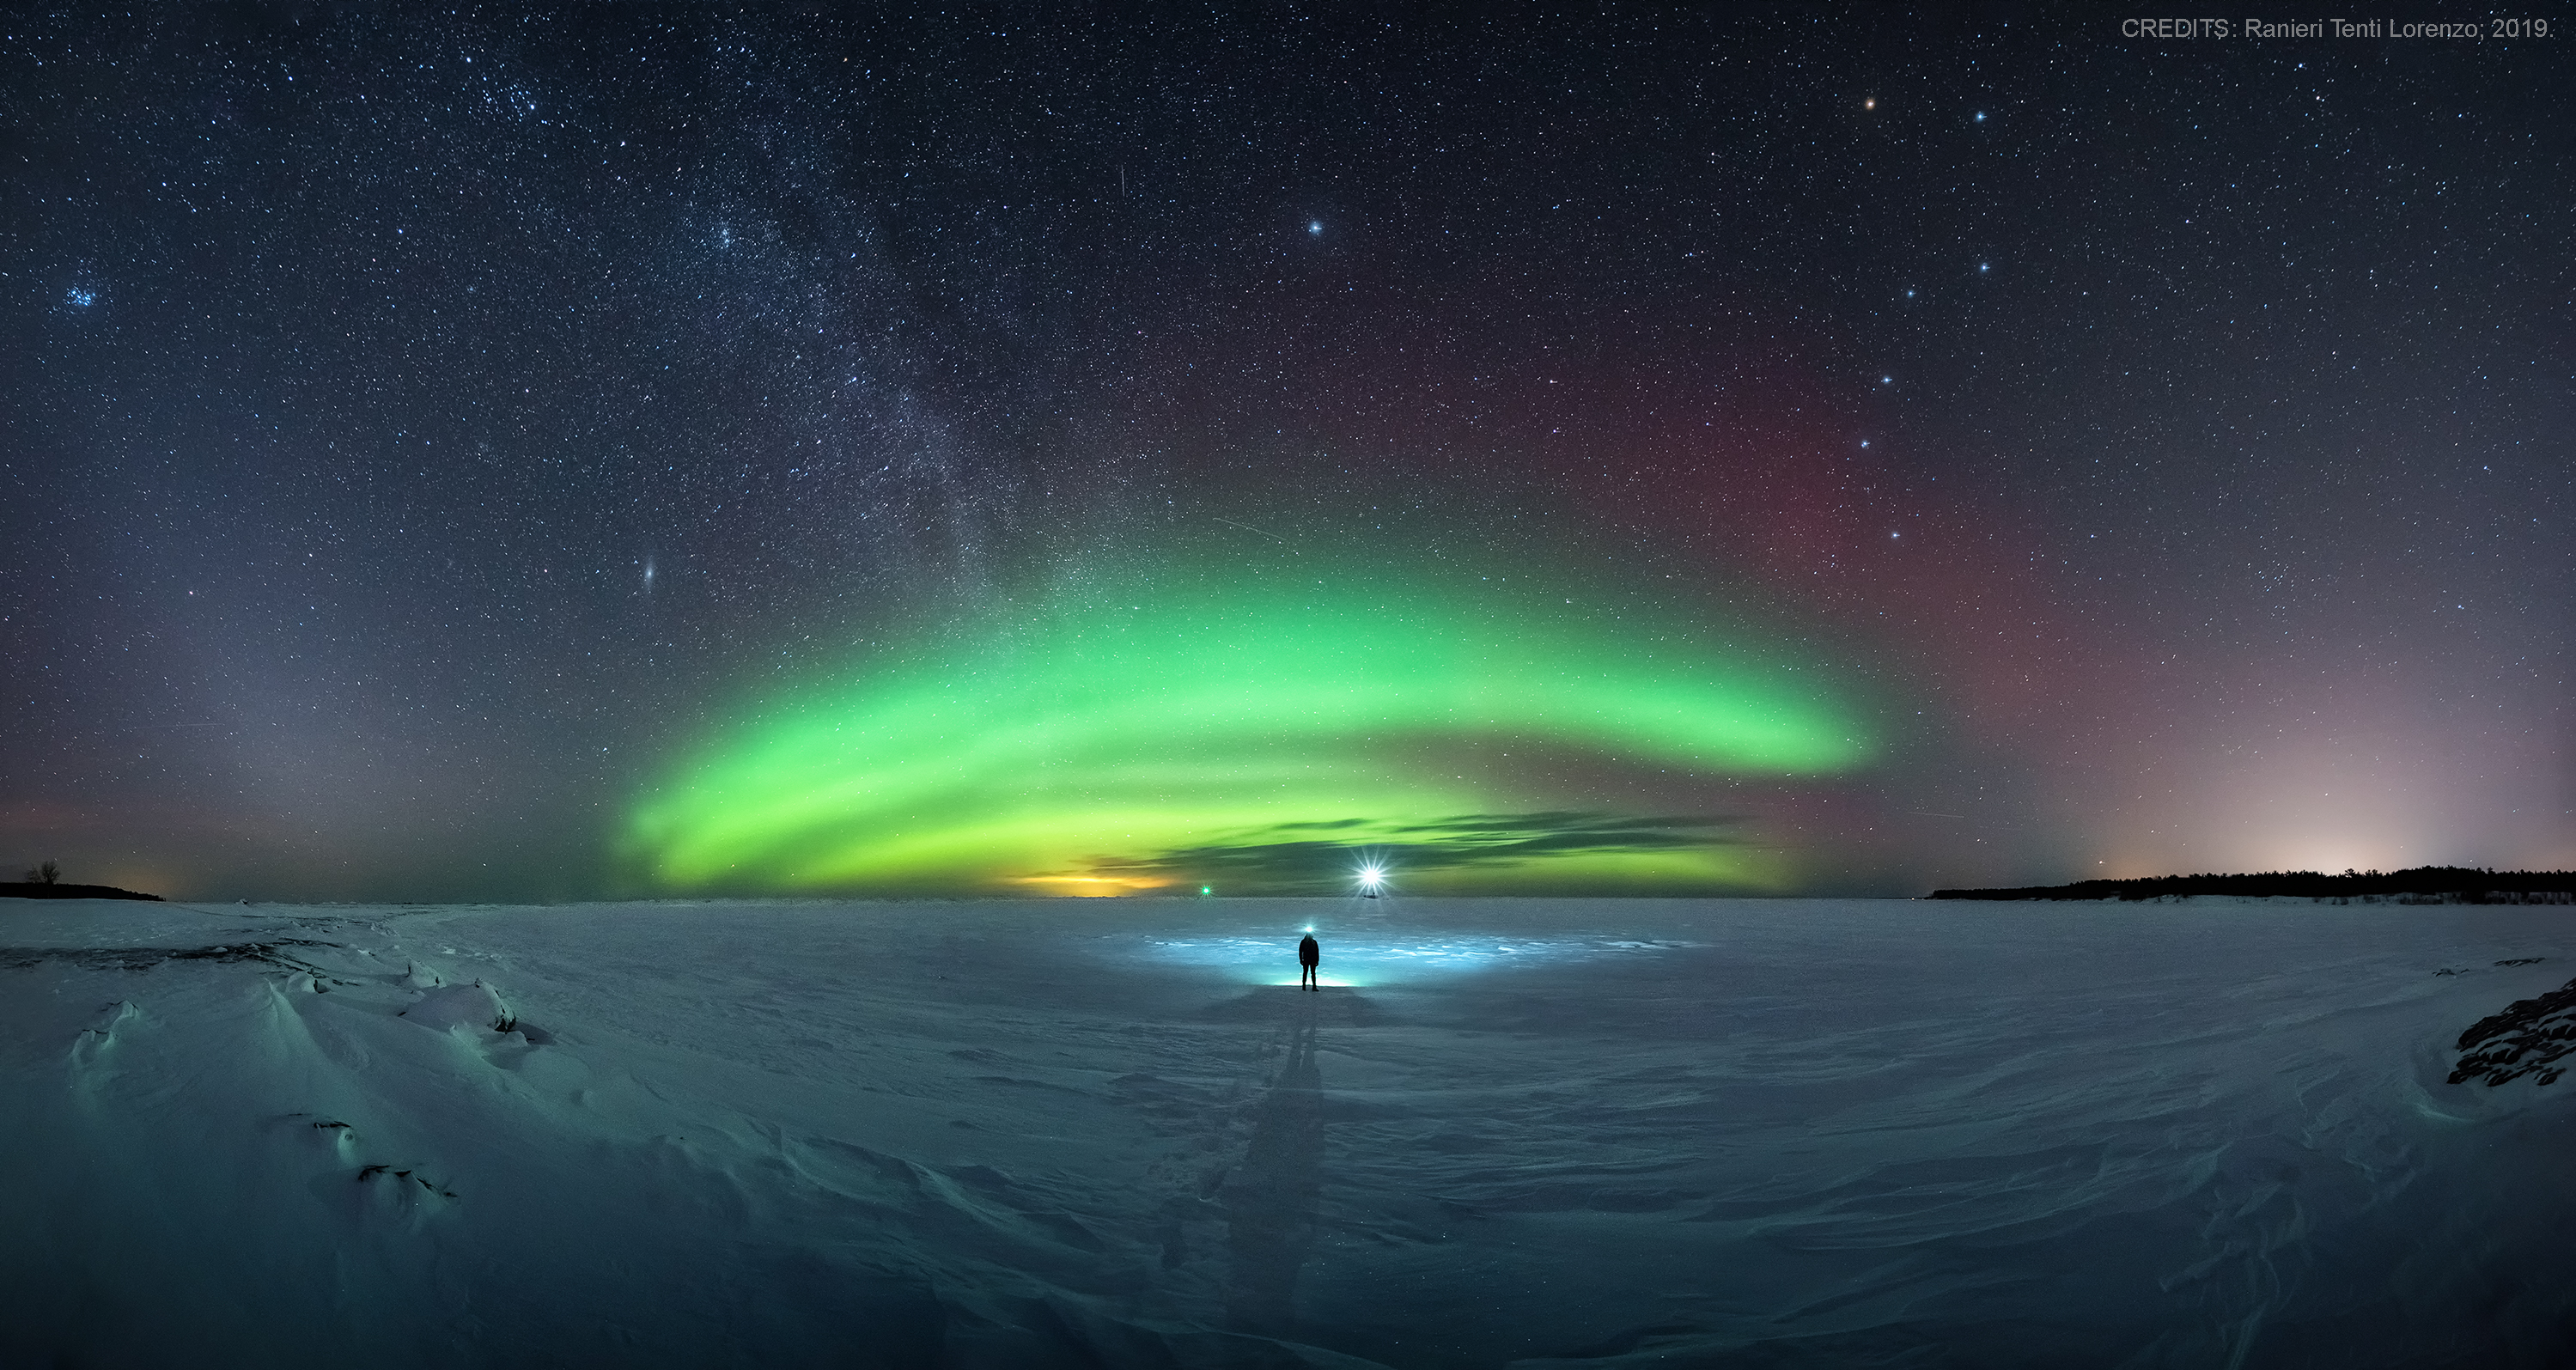 Apod Dayframe Apod 19 March 22 A Symphony In Northern Winter Skies